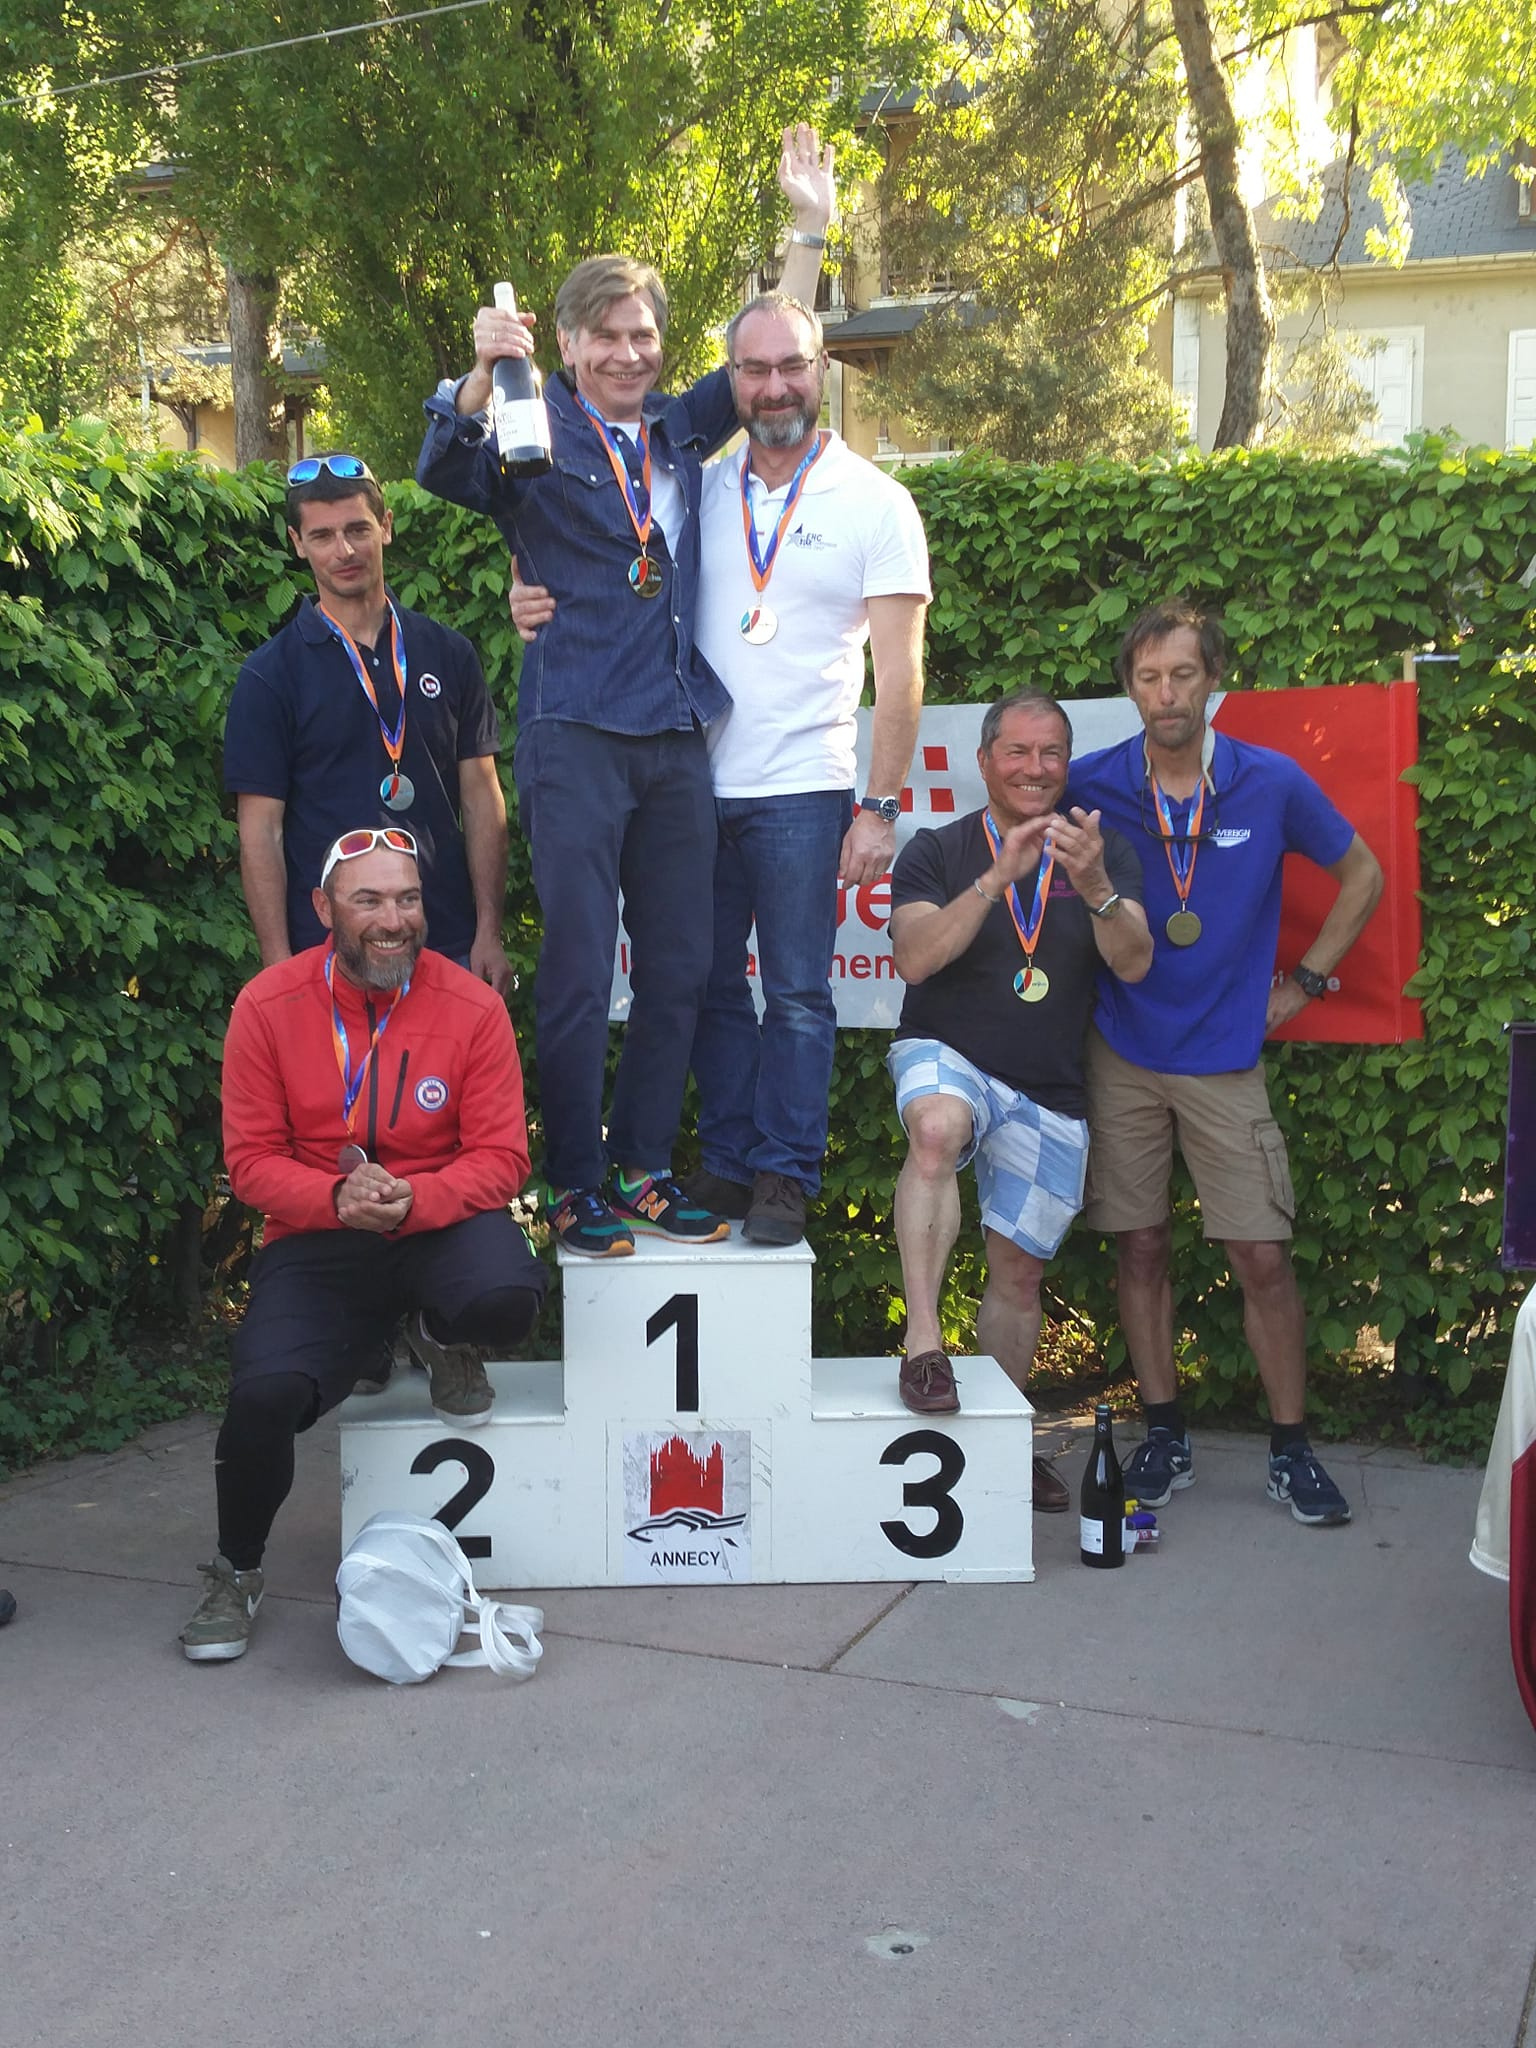  Star  French Championship 2022  Annecy FRA  Final results  Swiss victory